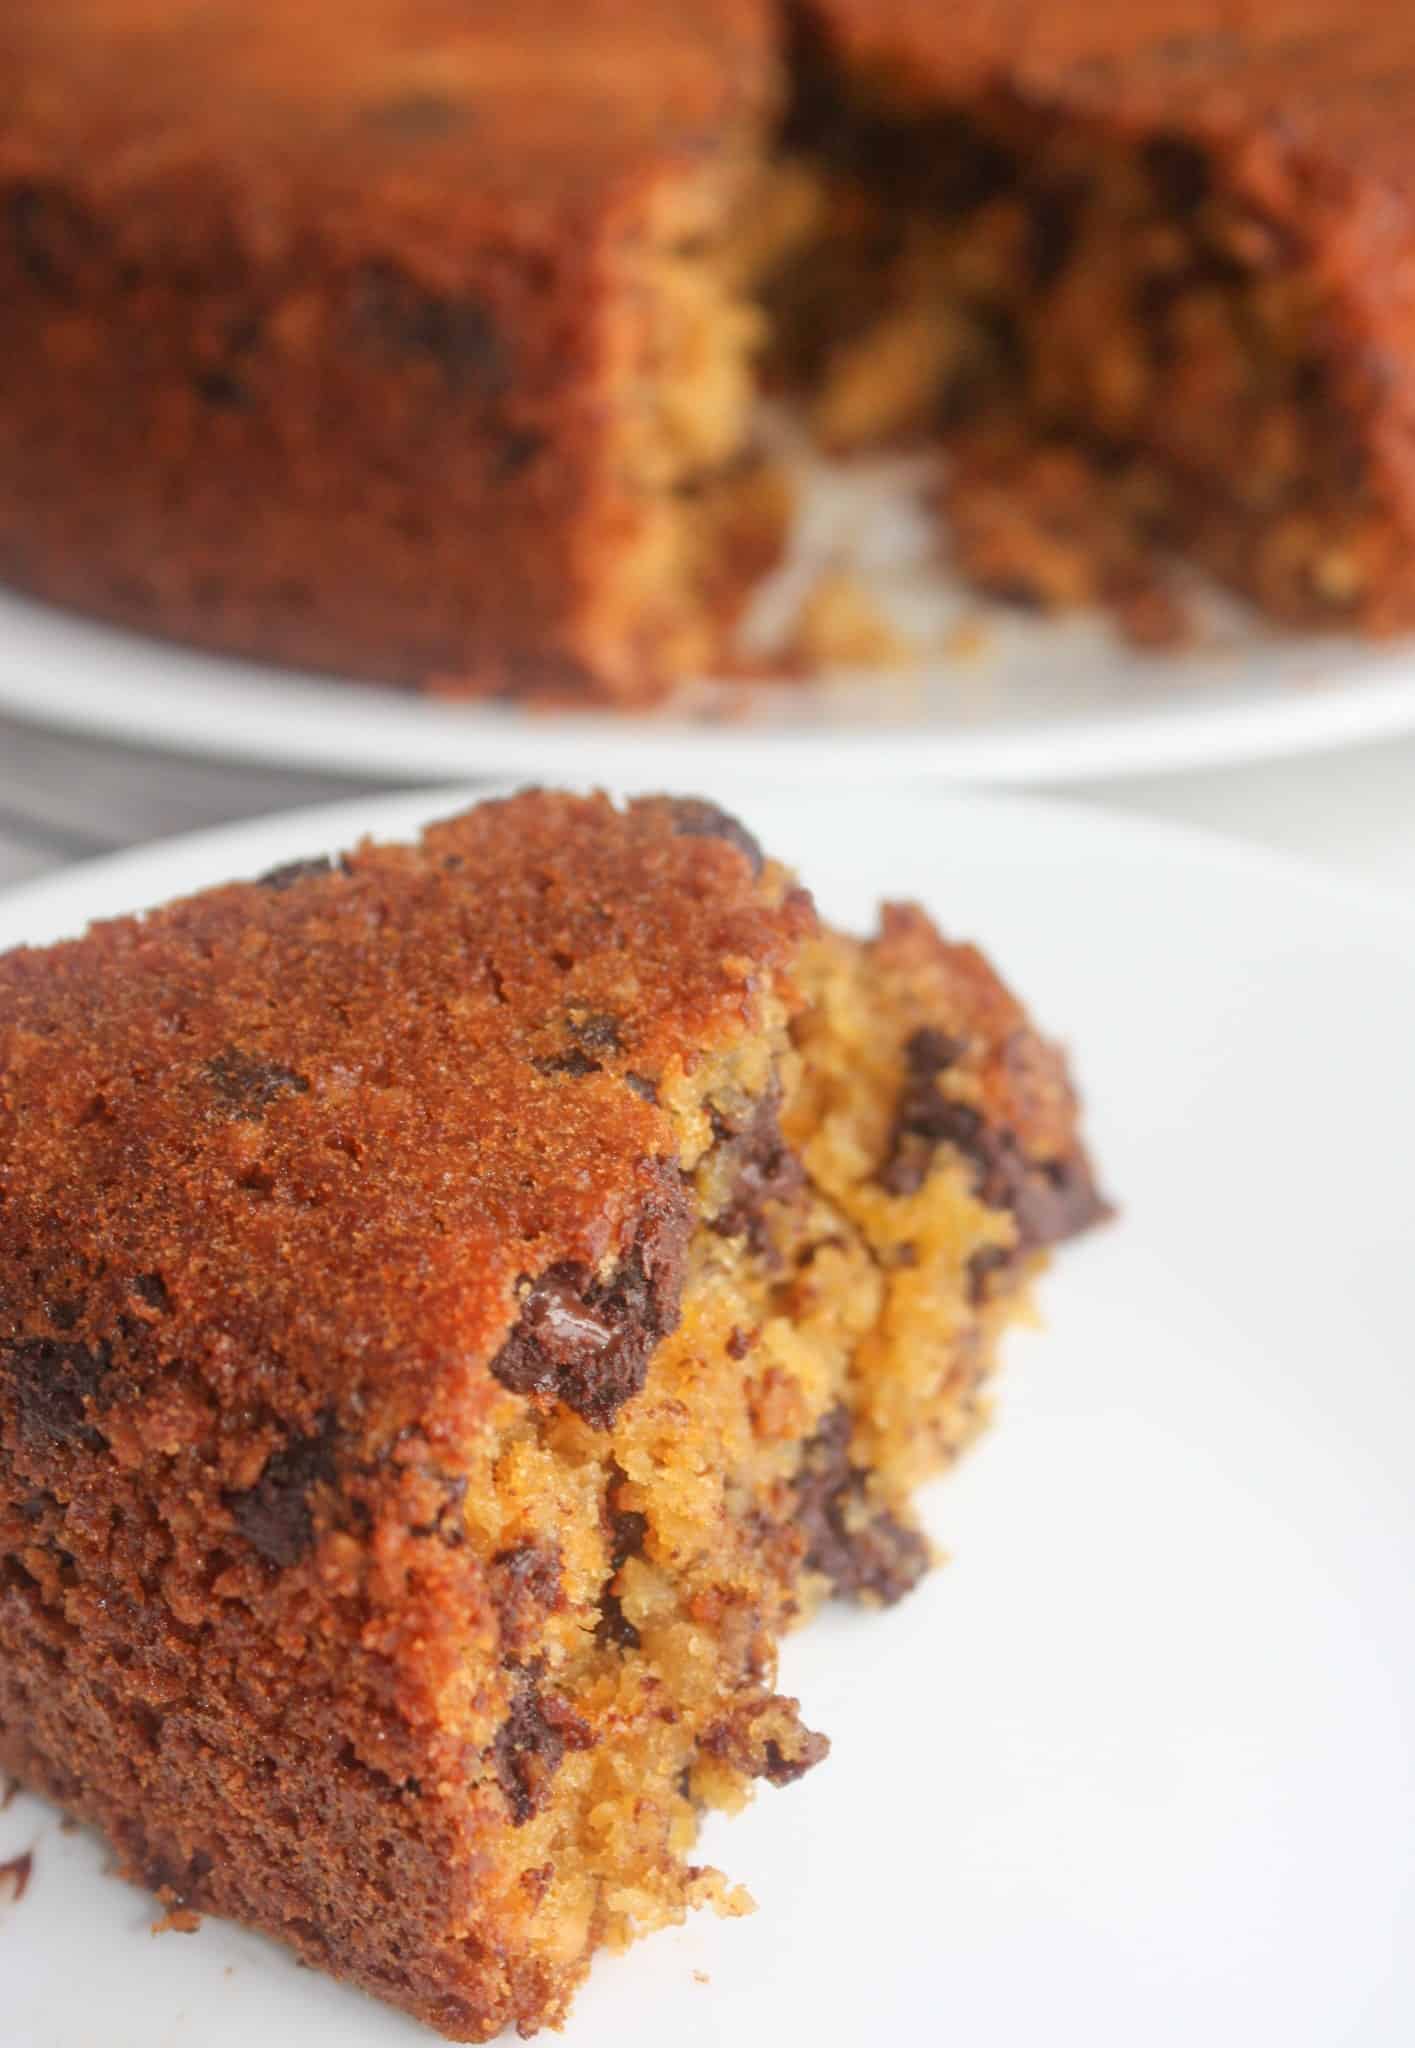 Oatmeal Chocolate Chip Cake is more like a coffee cake or old fashioned snack cake.   The addition of sweet potato in this gluten free version gives added moisture and goodness.